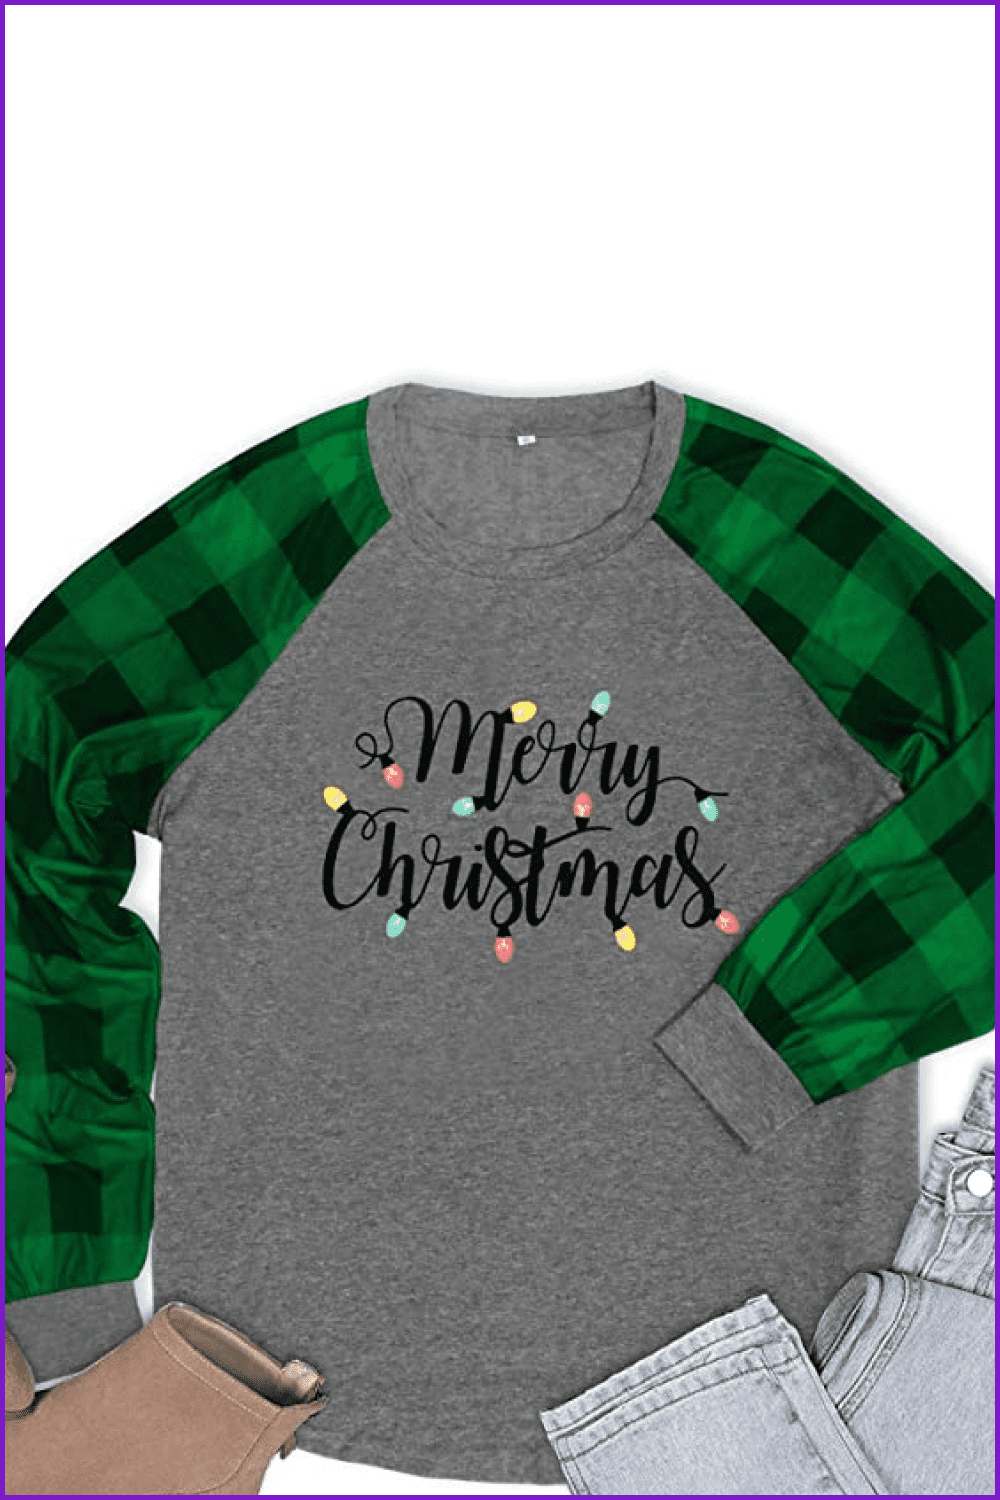 Long-sleeved t-shirt with checkered sleeves and the inscription Merry Christmas with colorful lights on the edges of the letters.